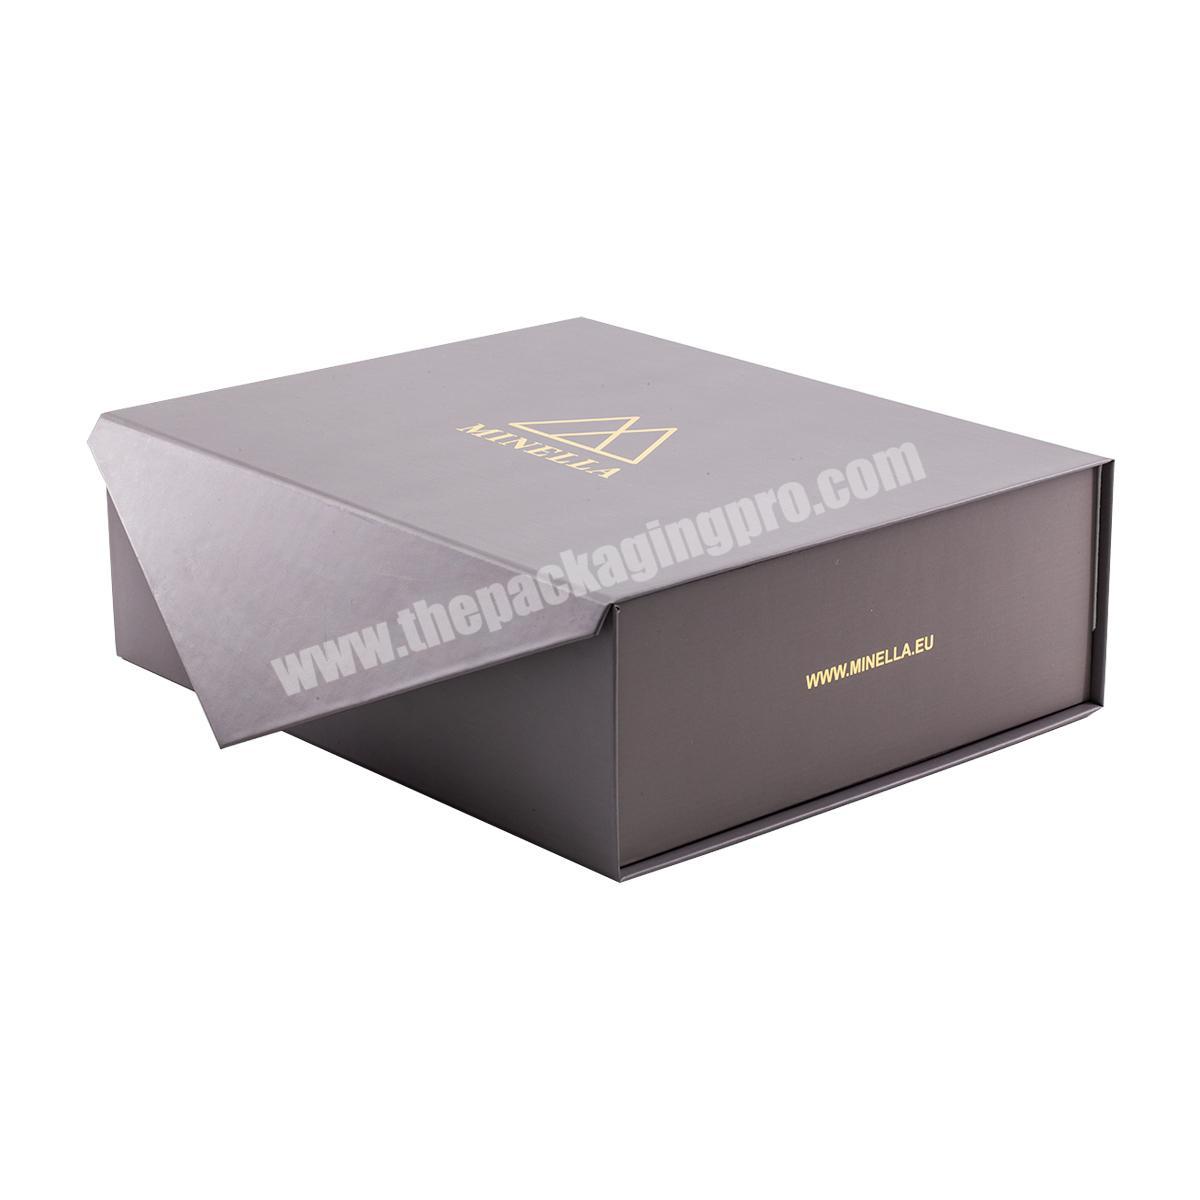 Get Custom Triangle Boxes  Custom Printed Triangle Boxes with Logo